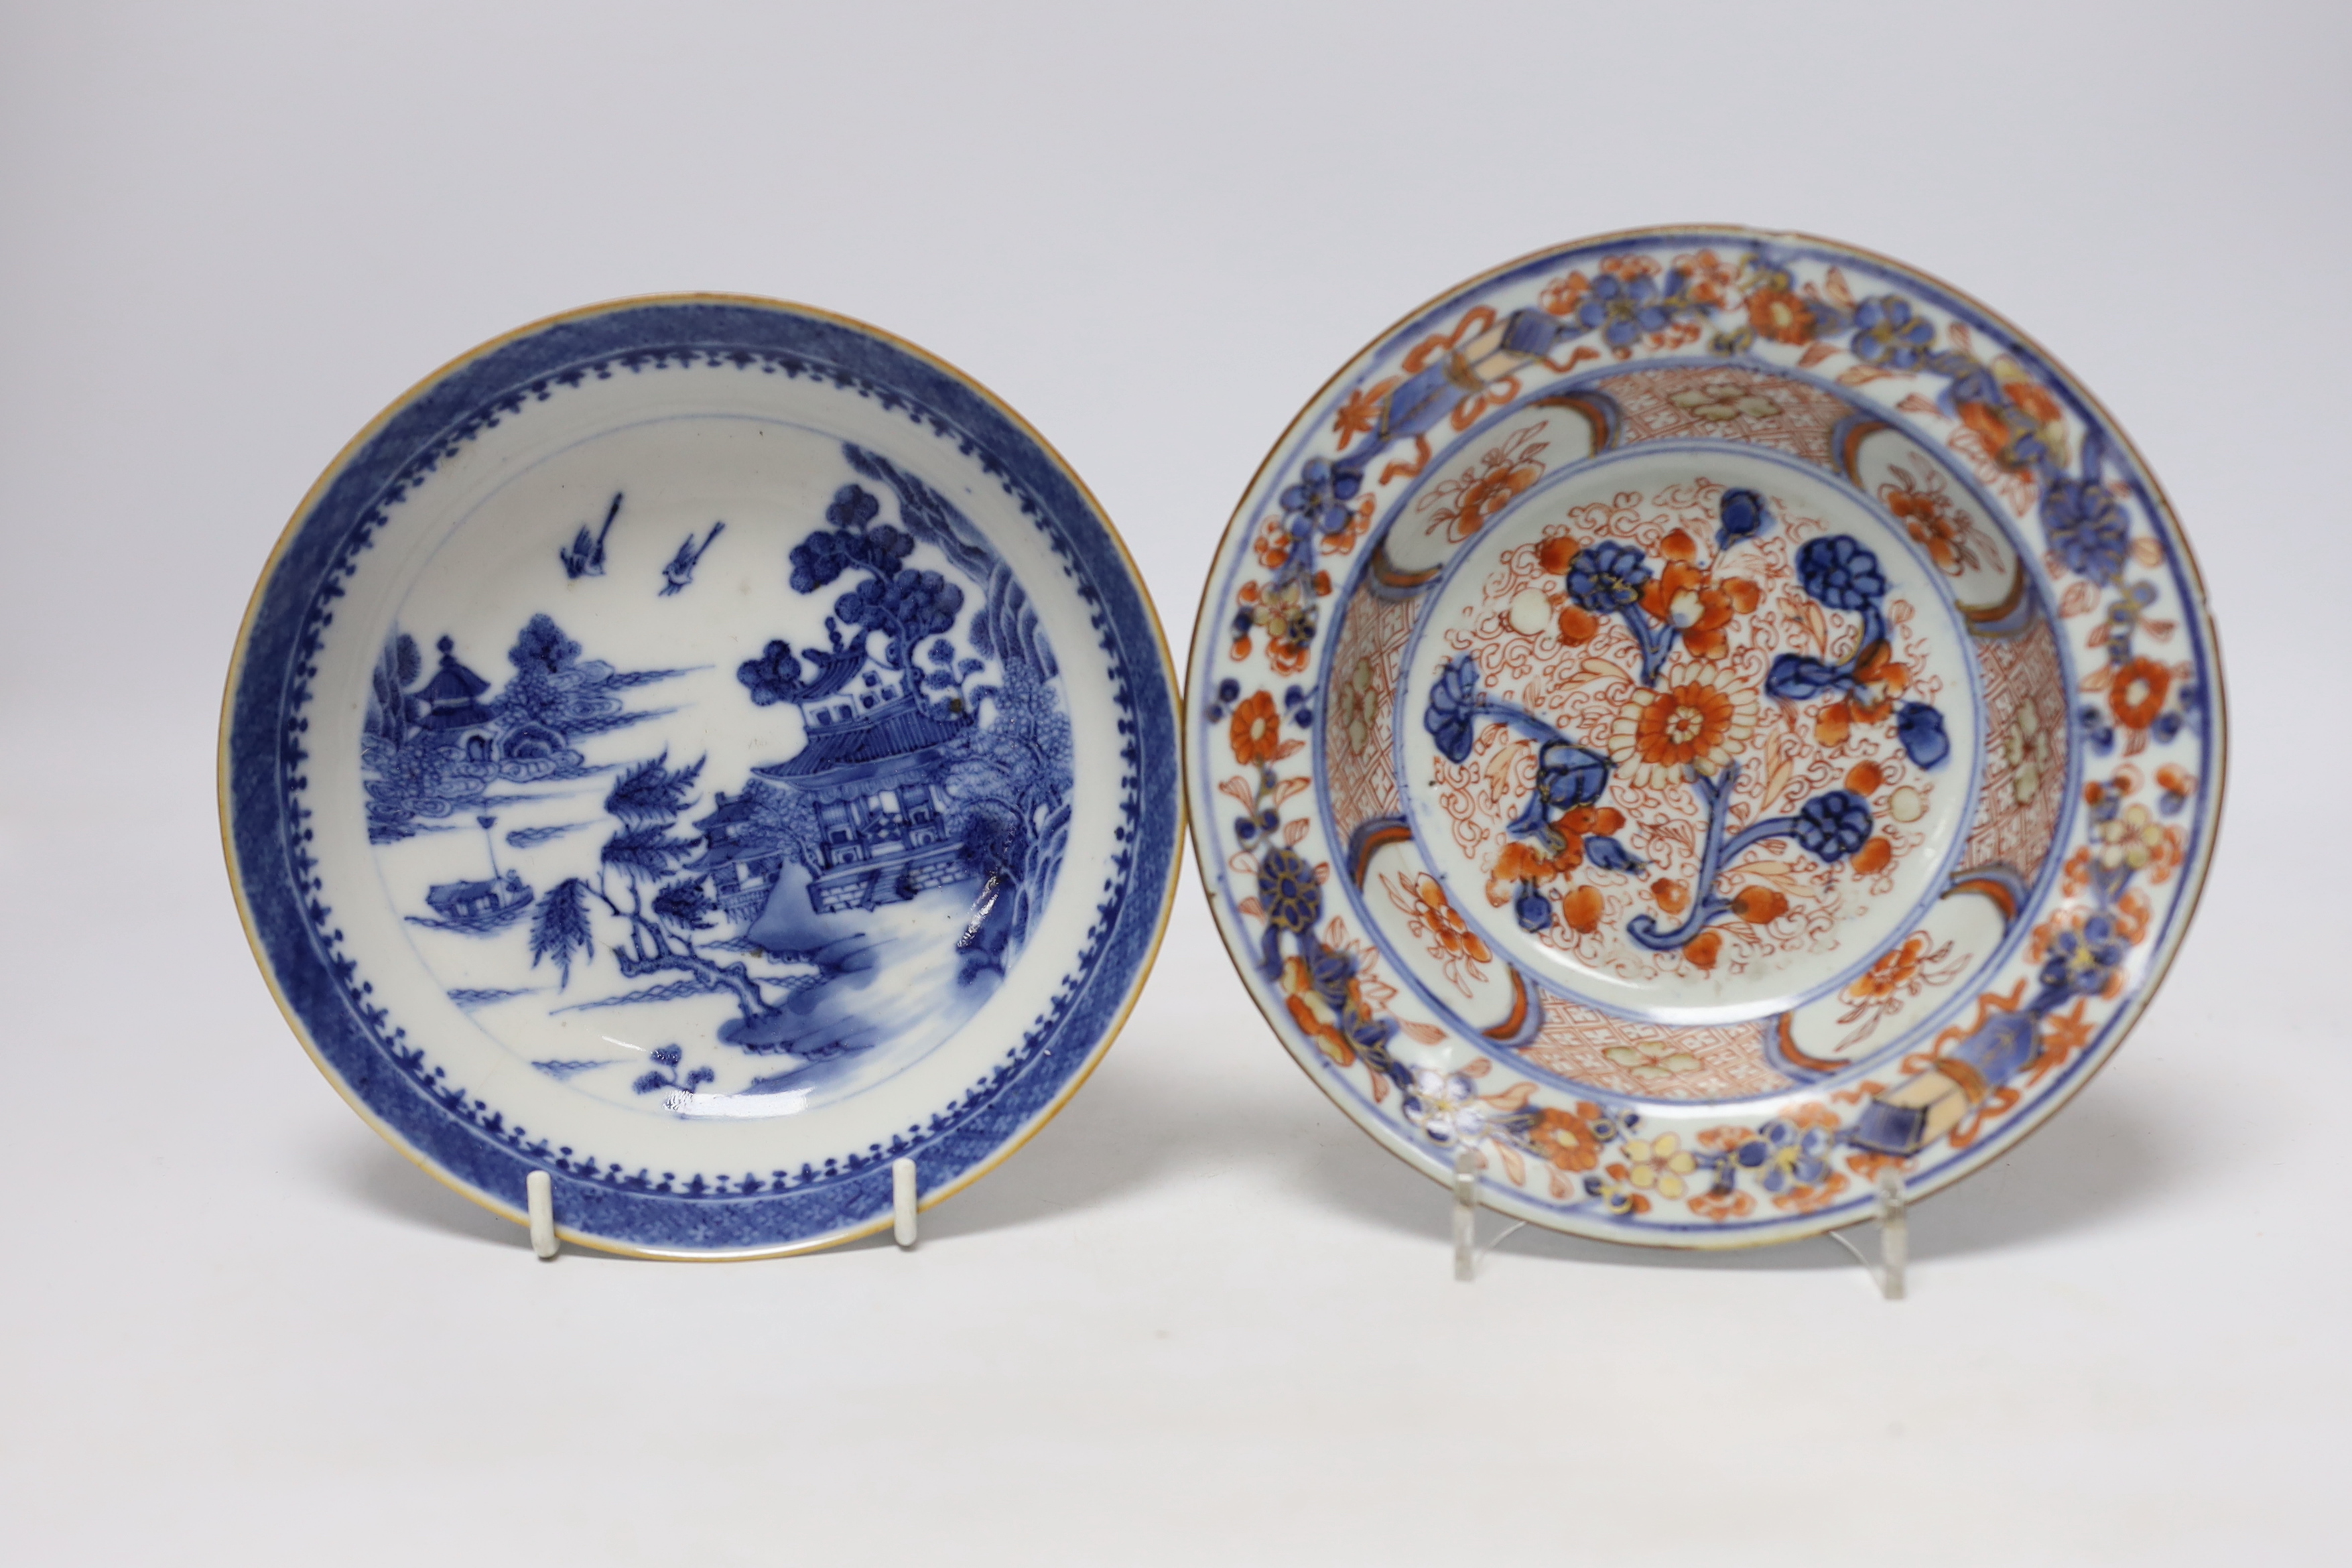 Five Chinese porcelain saucers and dishes and a sang de boeuf glazed vase, vase 21cm high